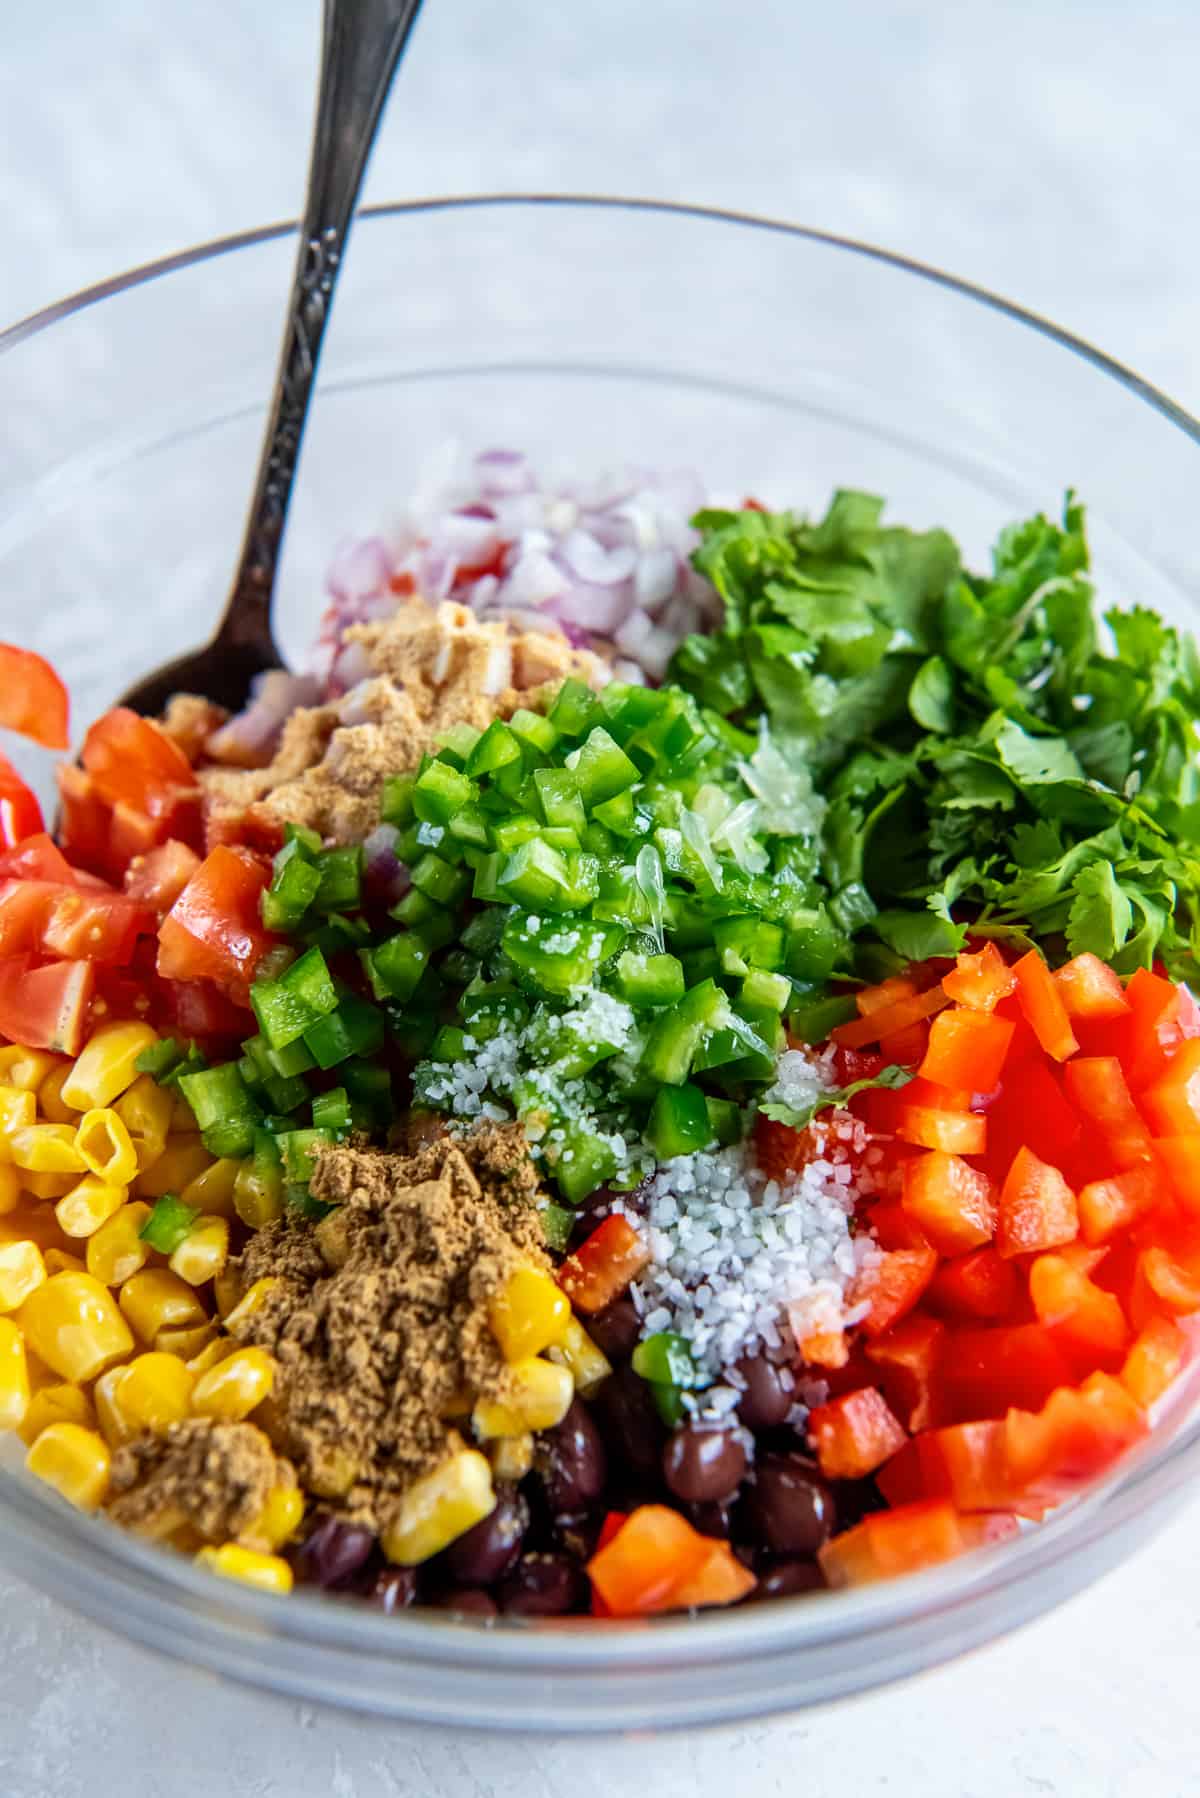 Corn, black beans, bell pepper, tomato and other ingredients in a large mixing bowl with a spoon.